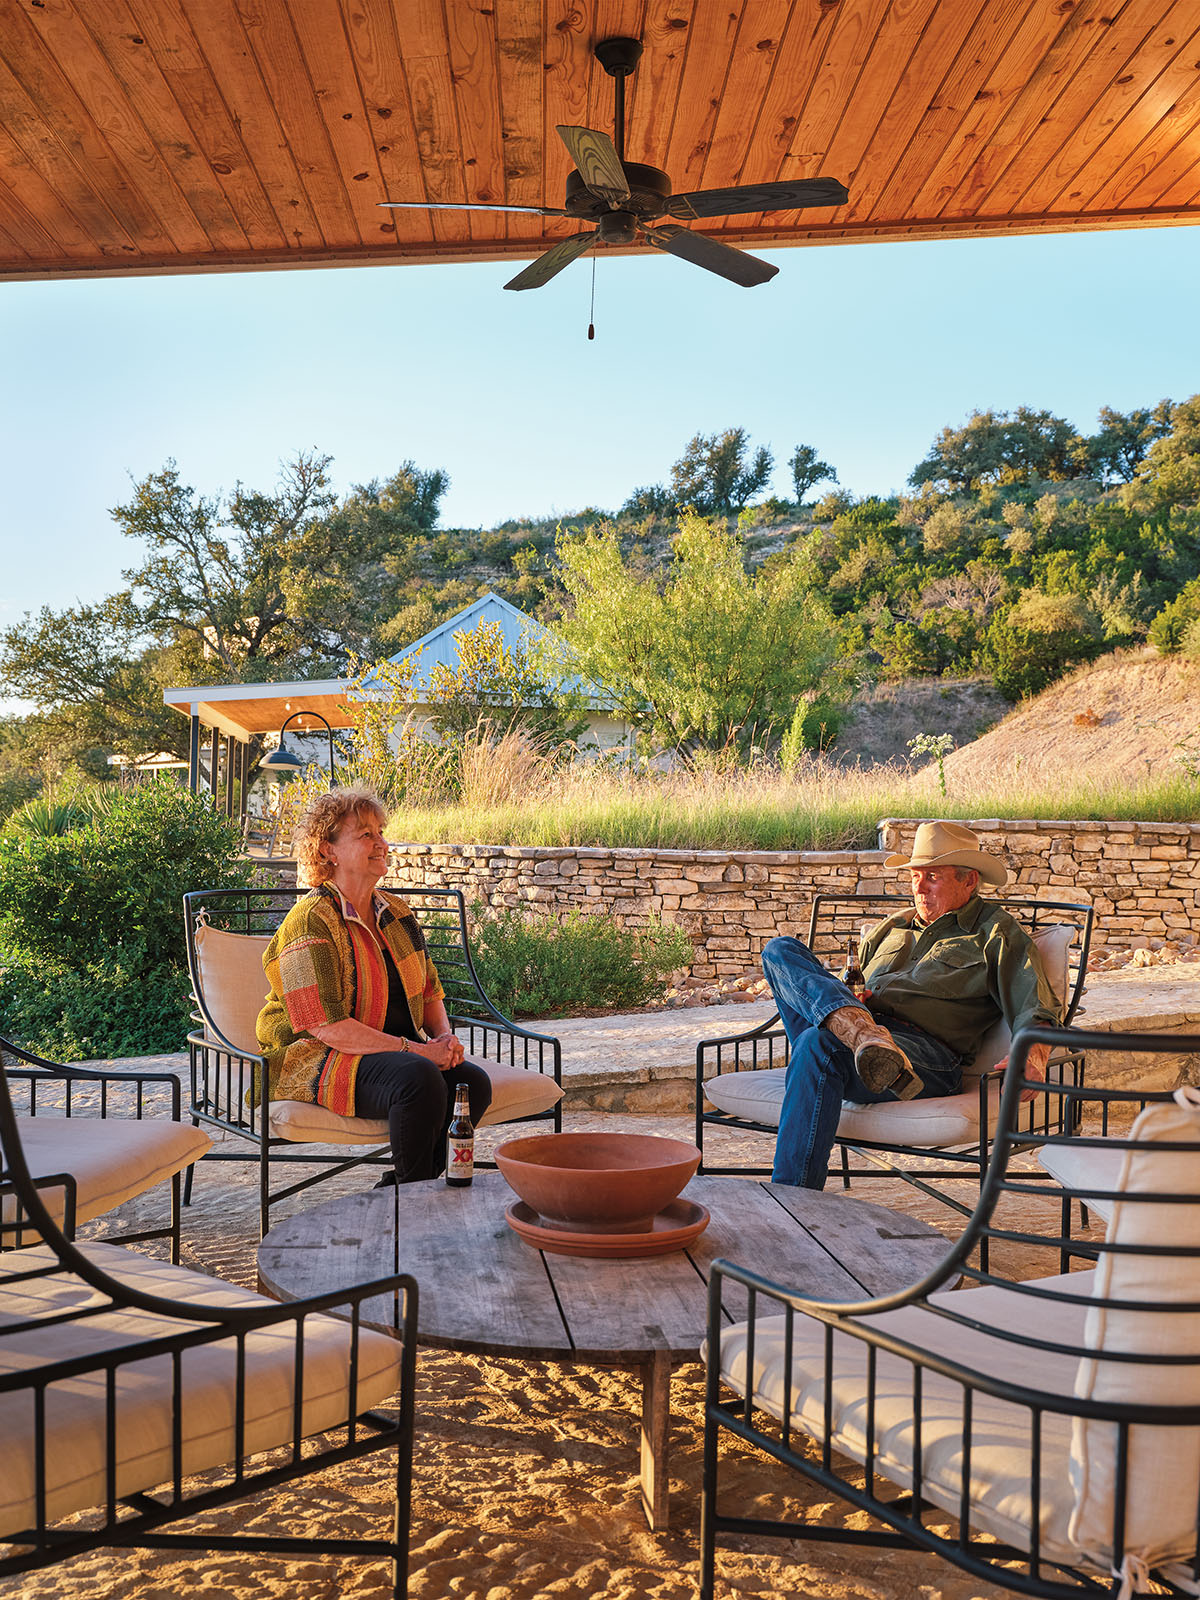 Two people sit in outdoor furniture around a stone firepit